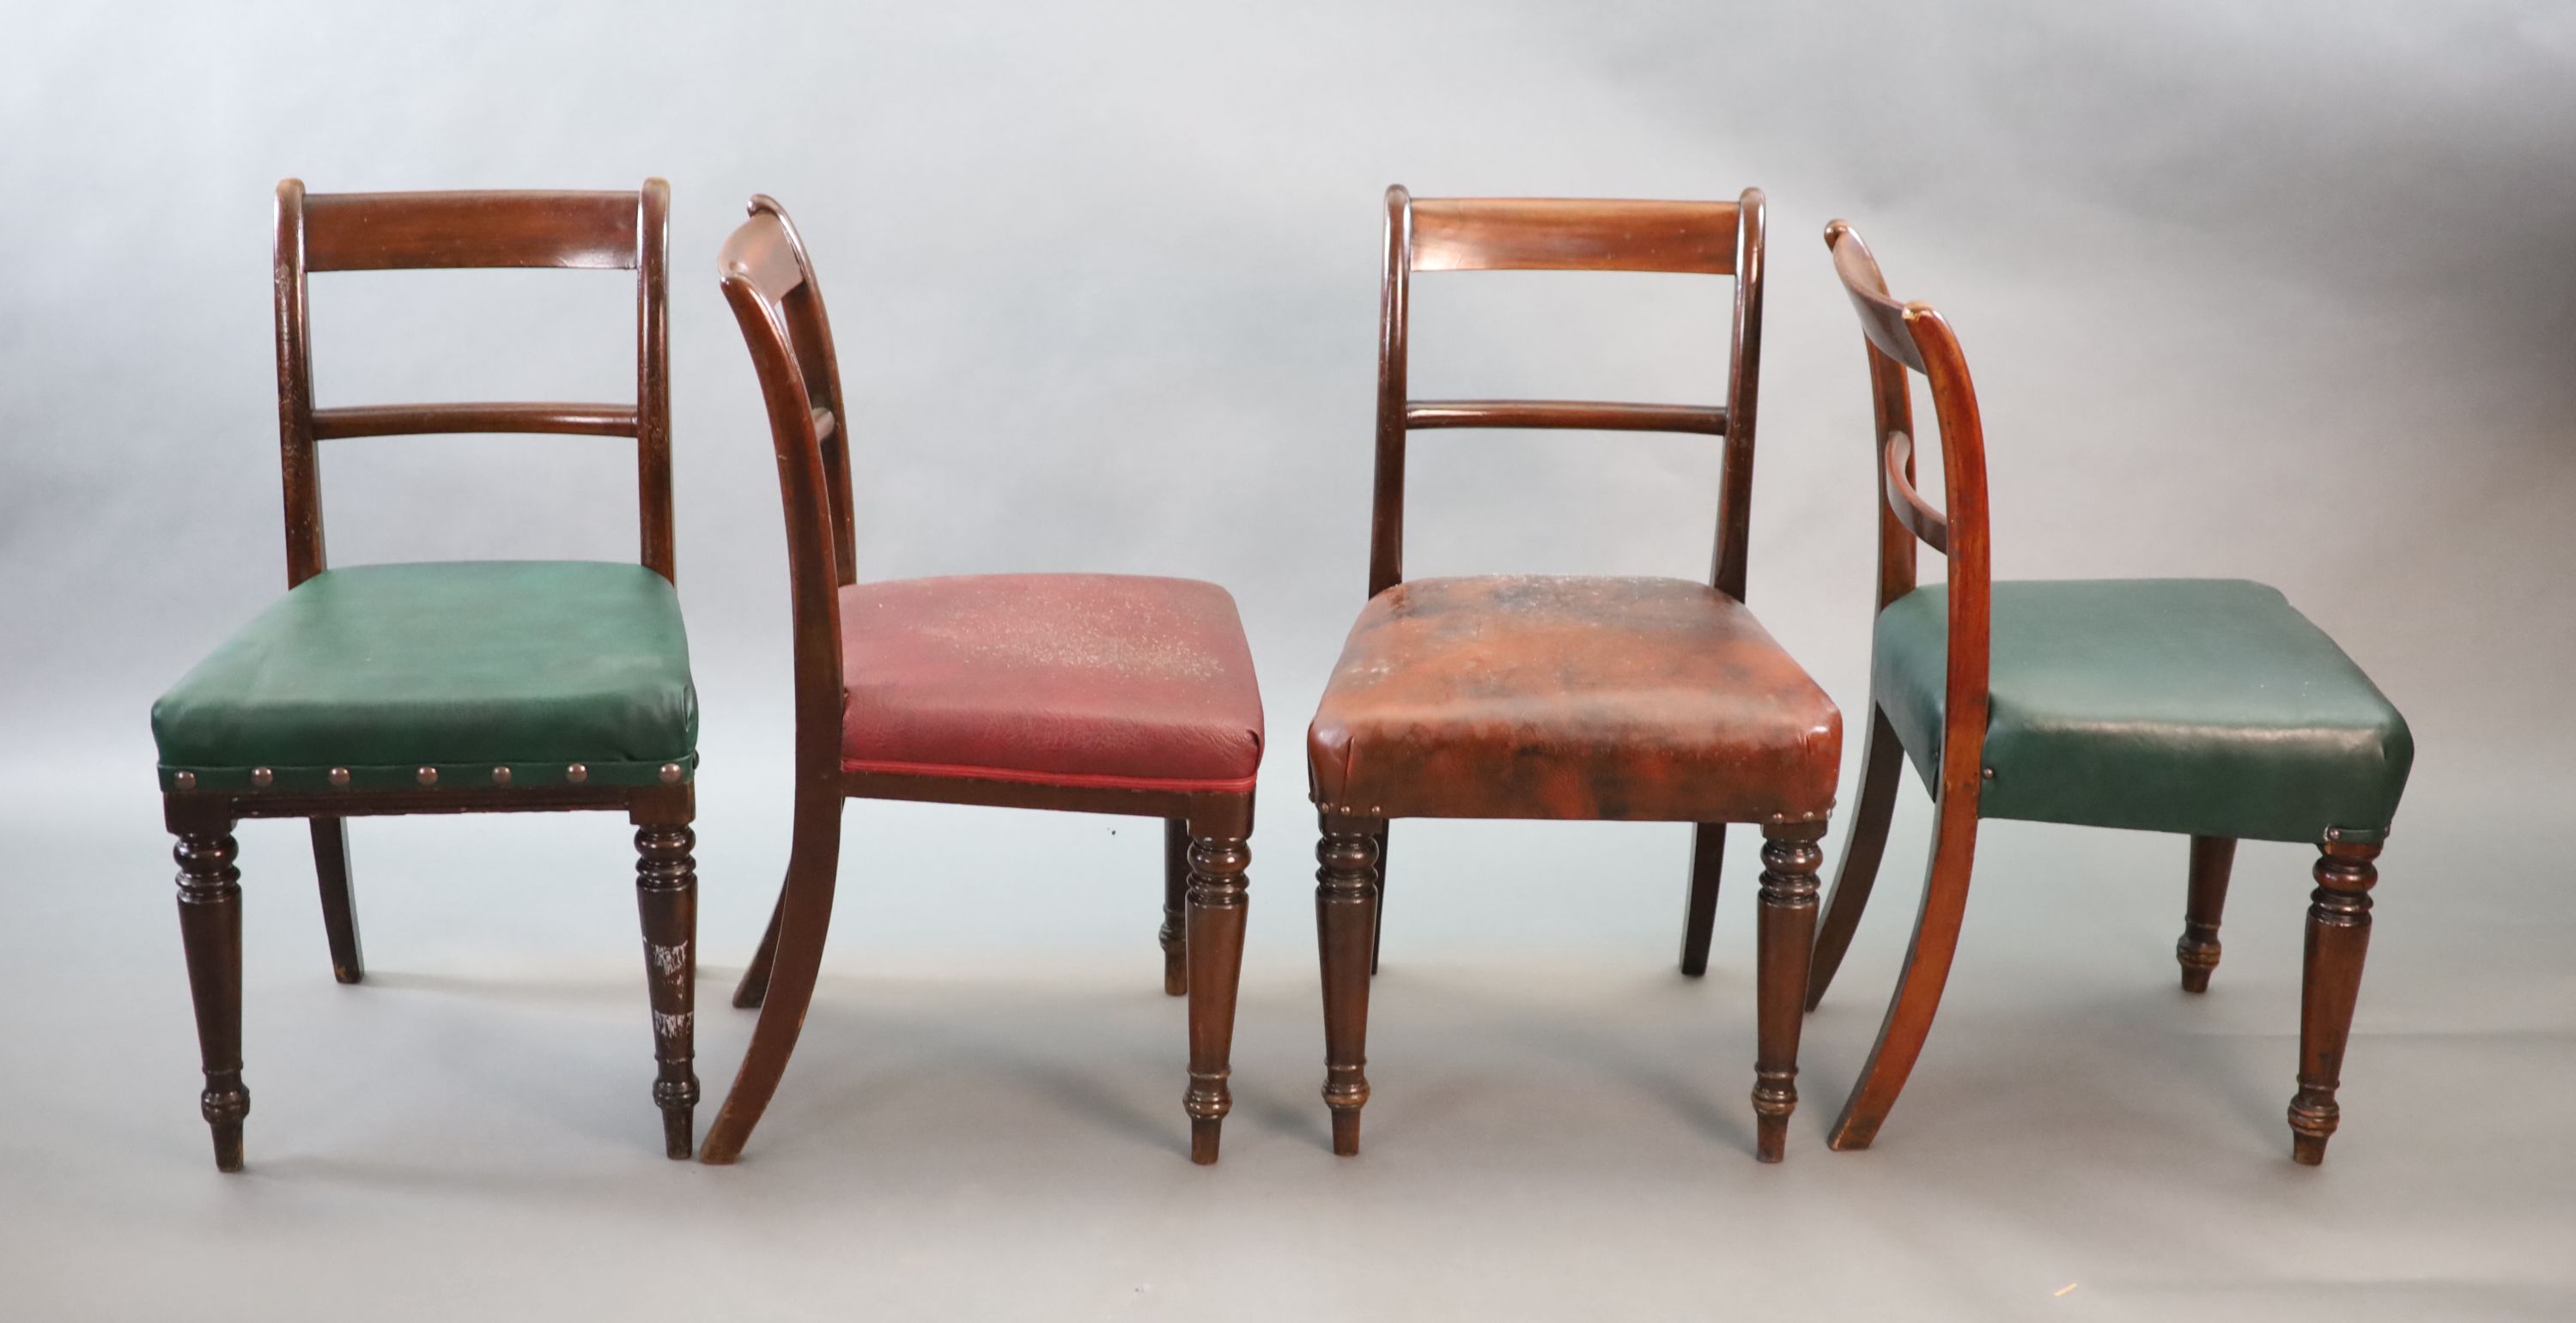 A set of ten early Victorian mahogany dining chairs